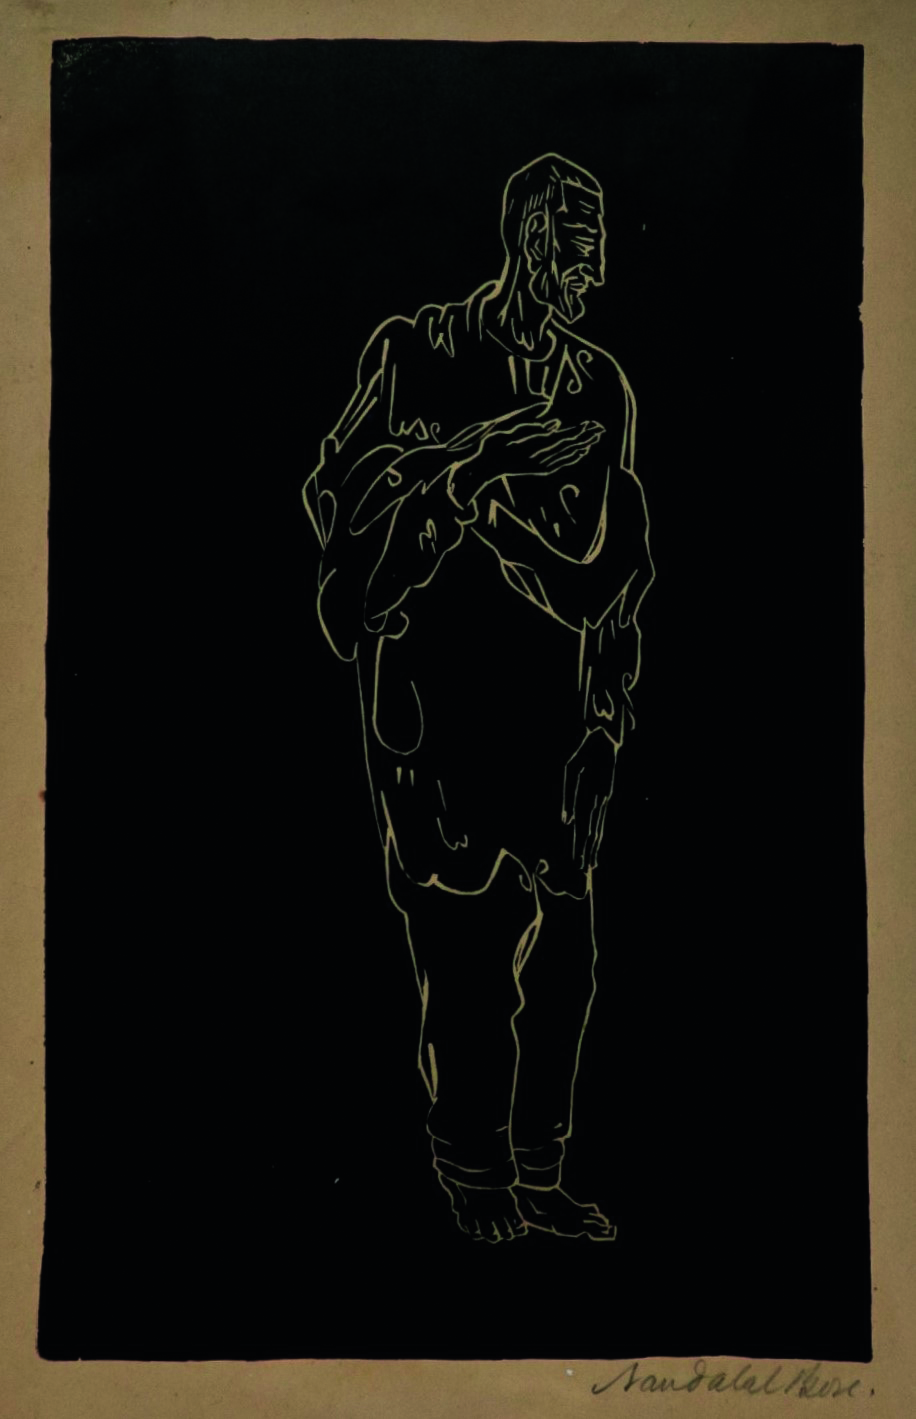 Gold outline of a person on a black background